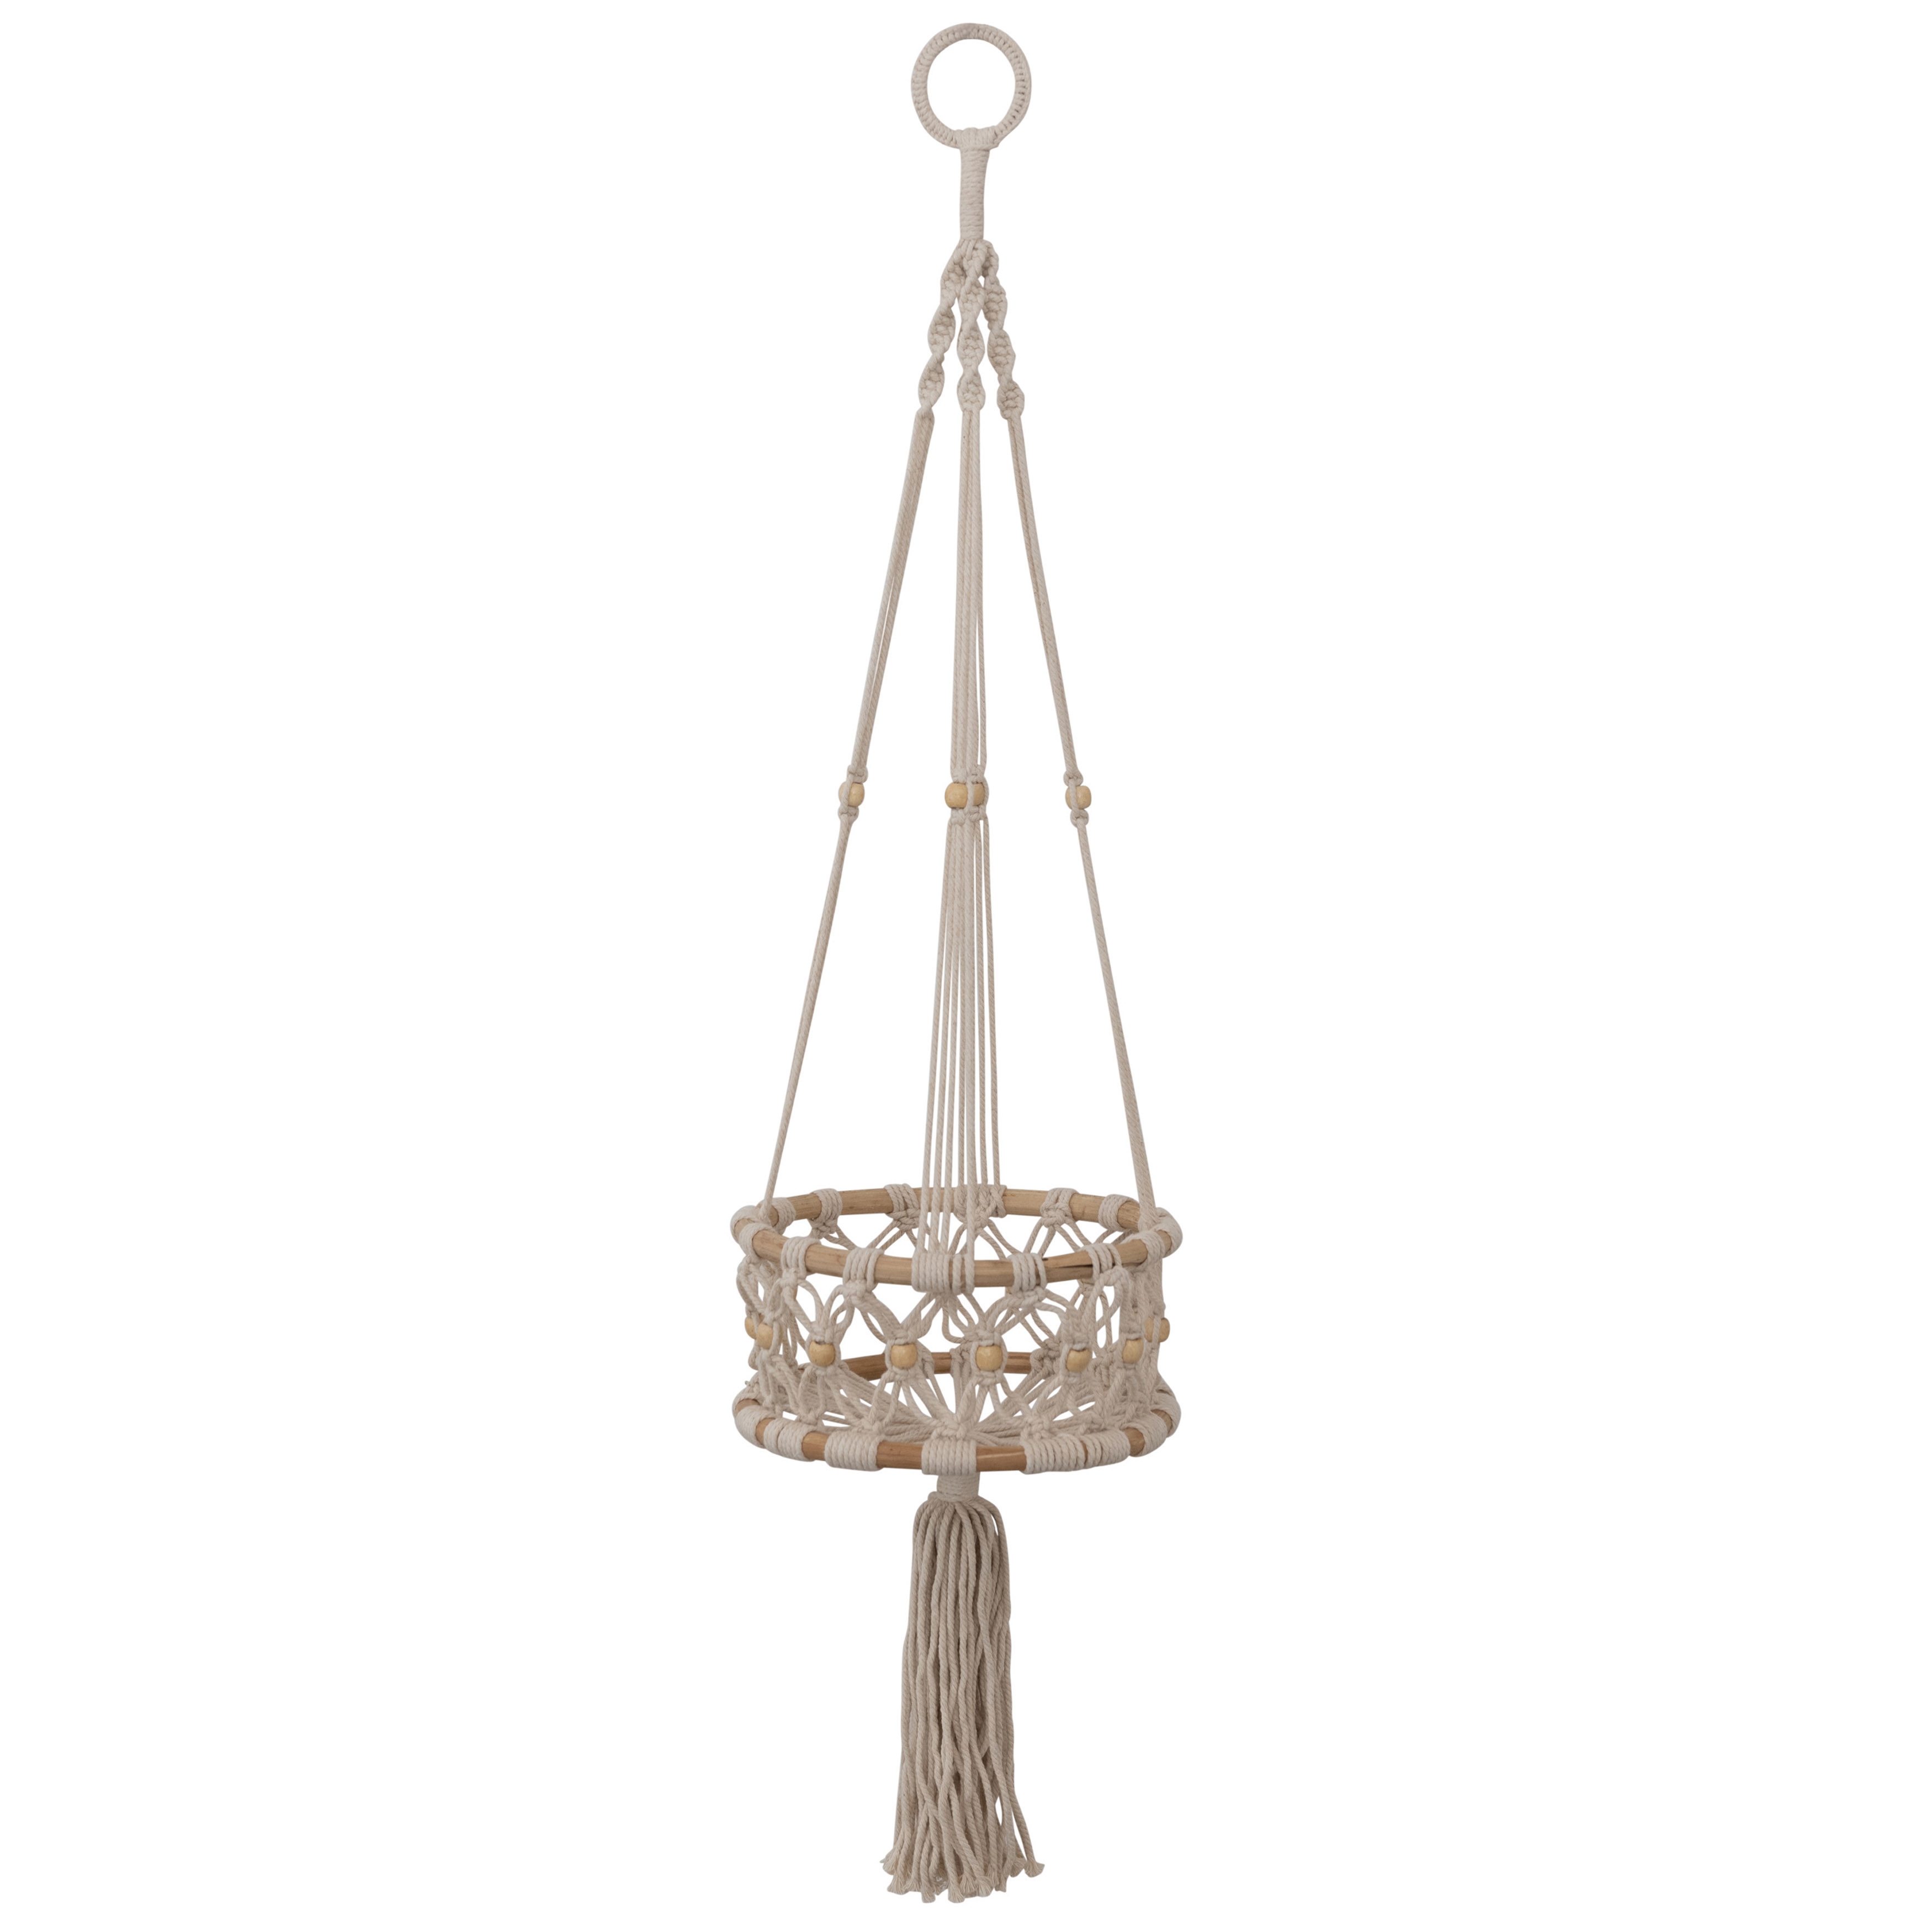  Handwoven Cotton Macramé & Rattan Plant Hanger with Wood Beads, Natural - Image 0